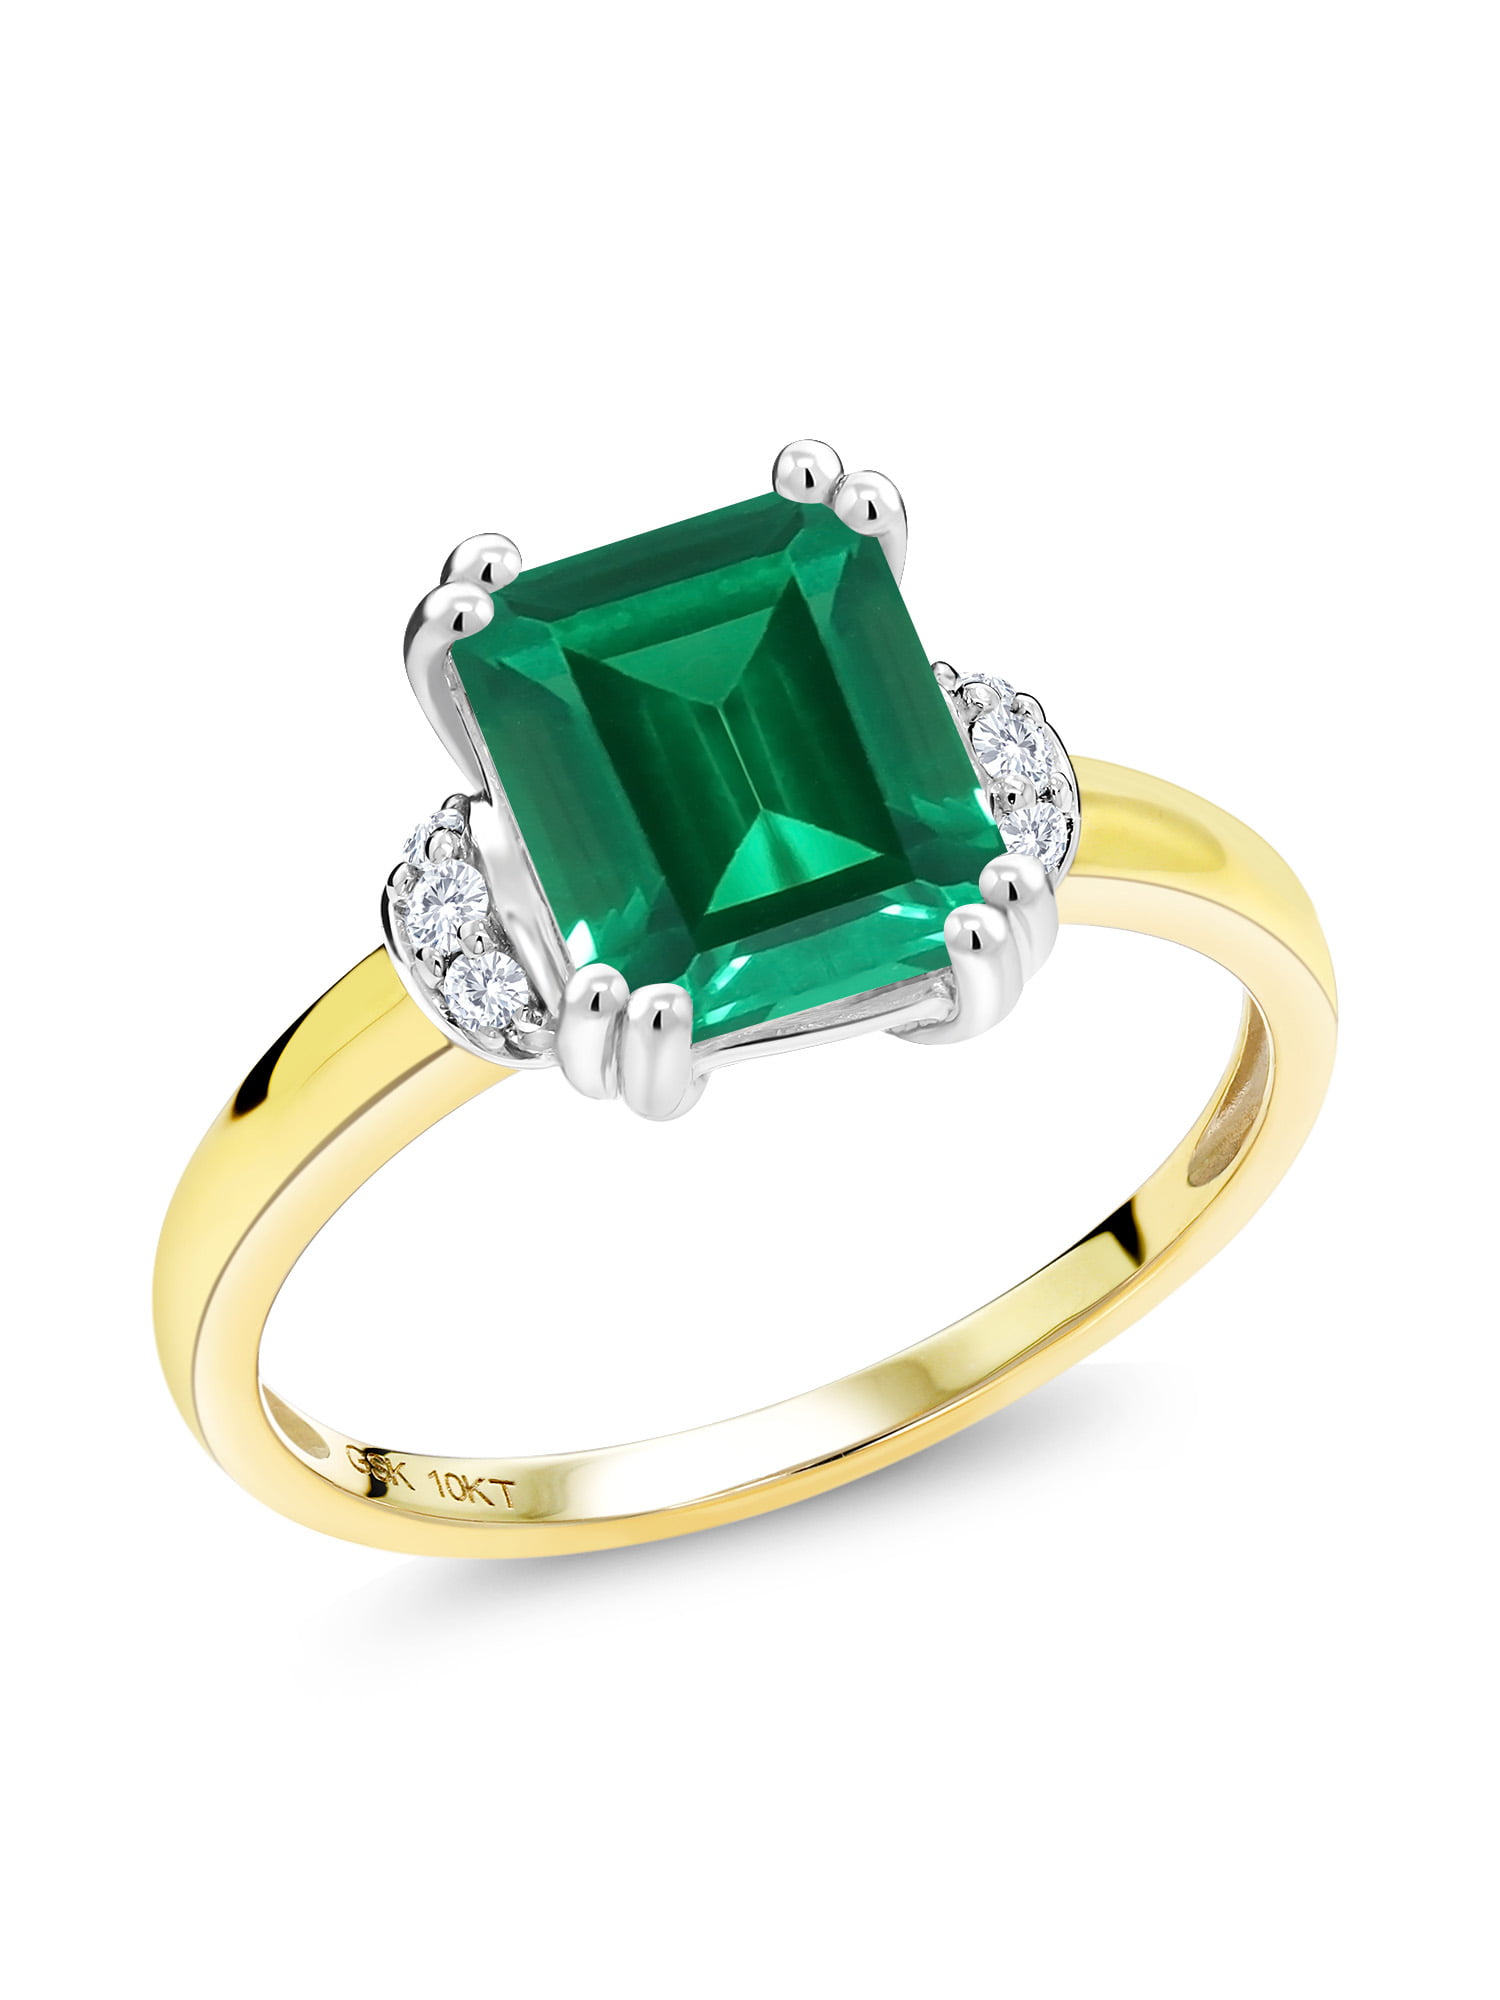 Gem Stone King - 10K Two Tone Gold Green Simulated Emerald and Diamond